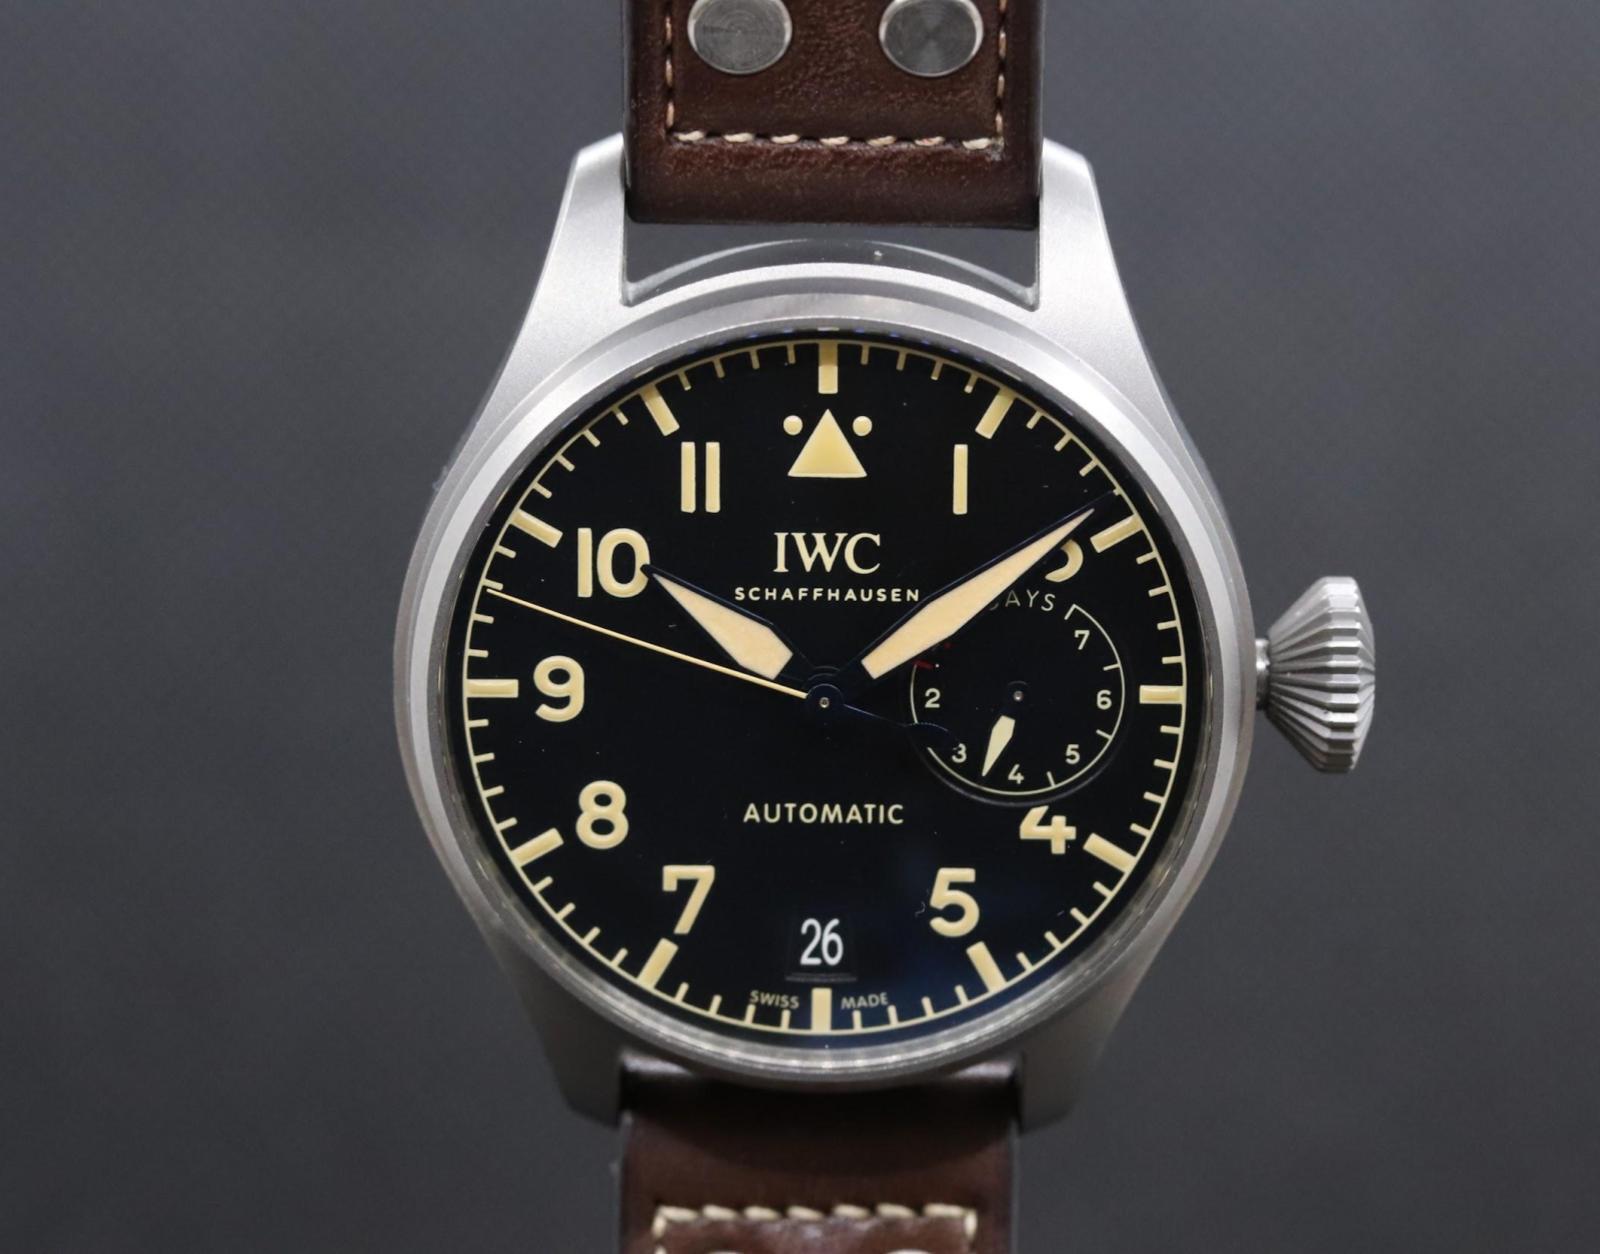 IWC SCHAFFHAUSEN Black Dial Automatic 46mm IW501004 From Japan 087 6108296